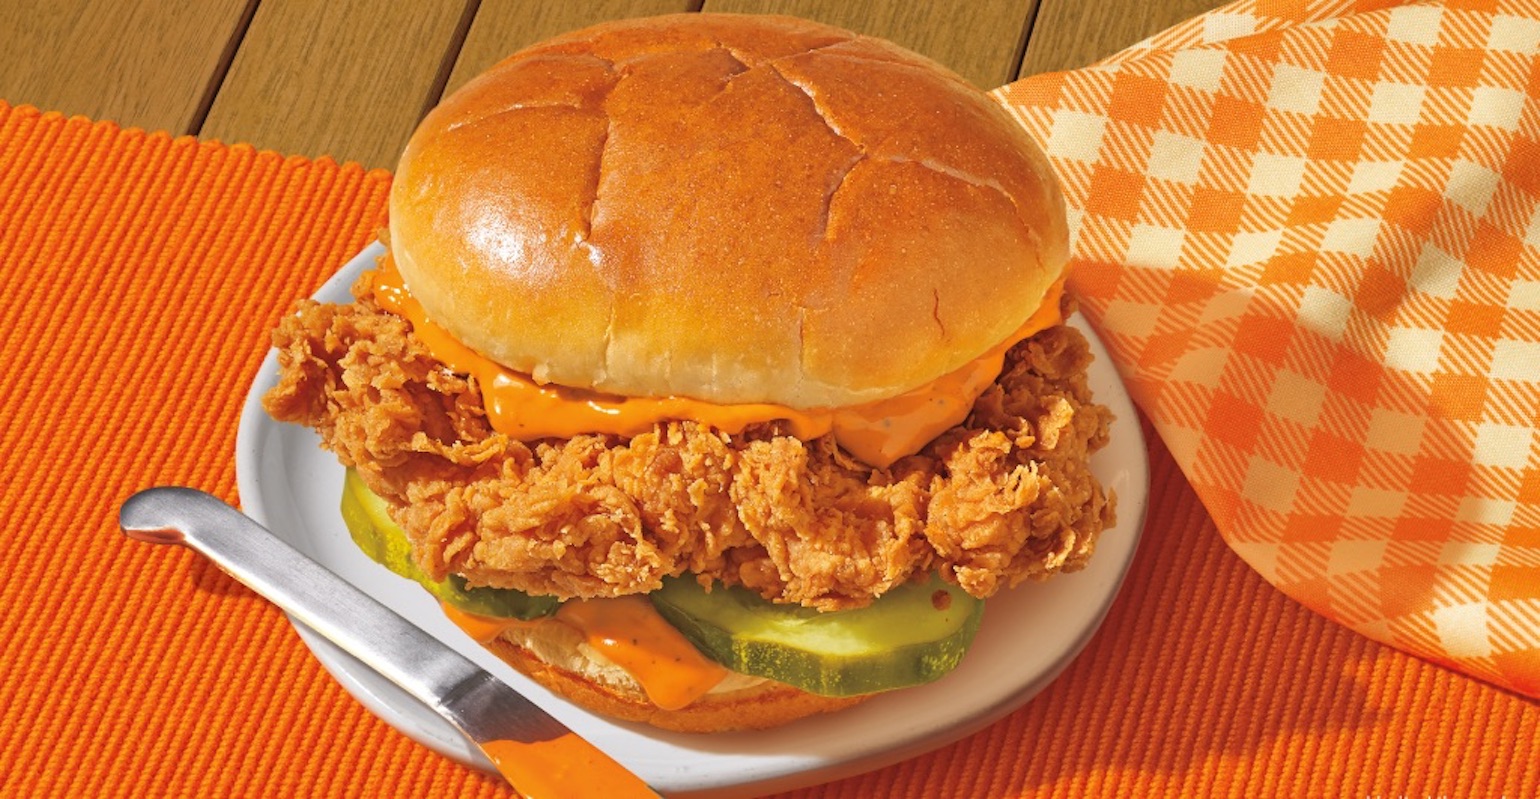 Popeyes expands chicken sandwich platform with buffalo ranch version